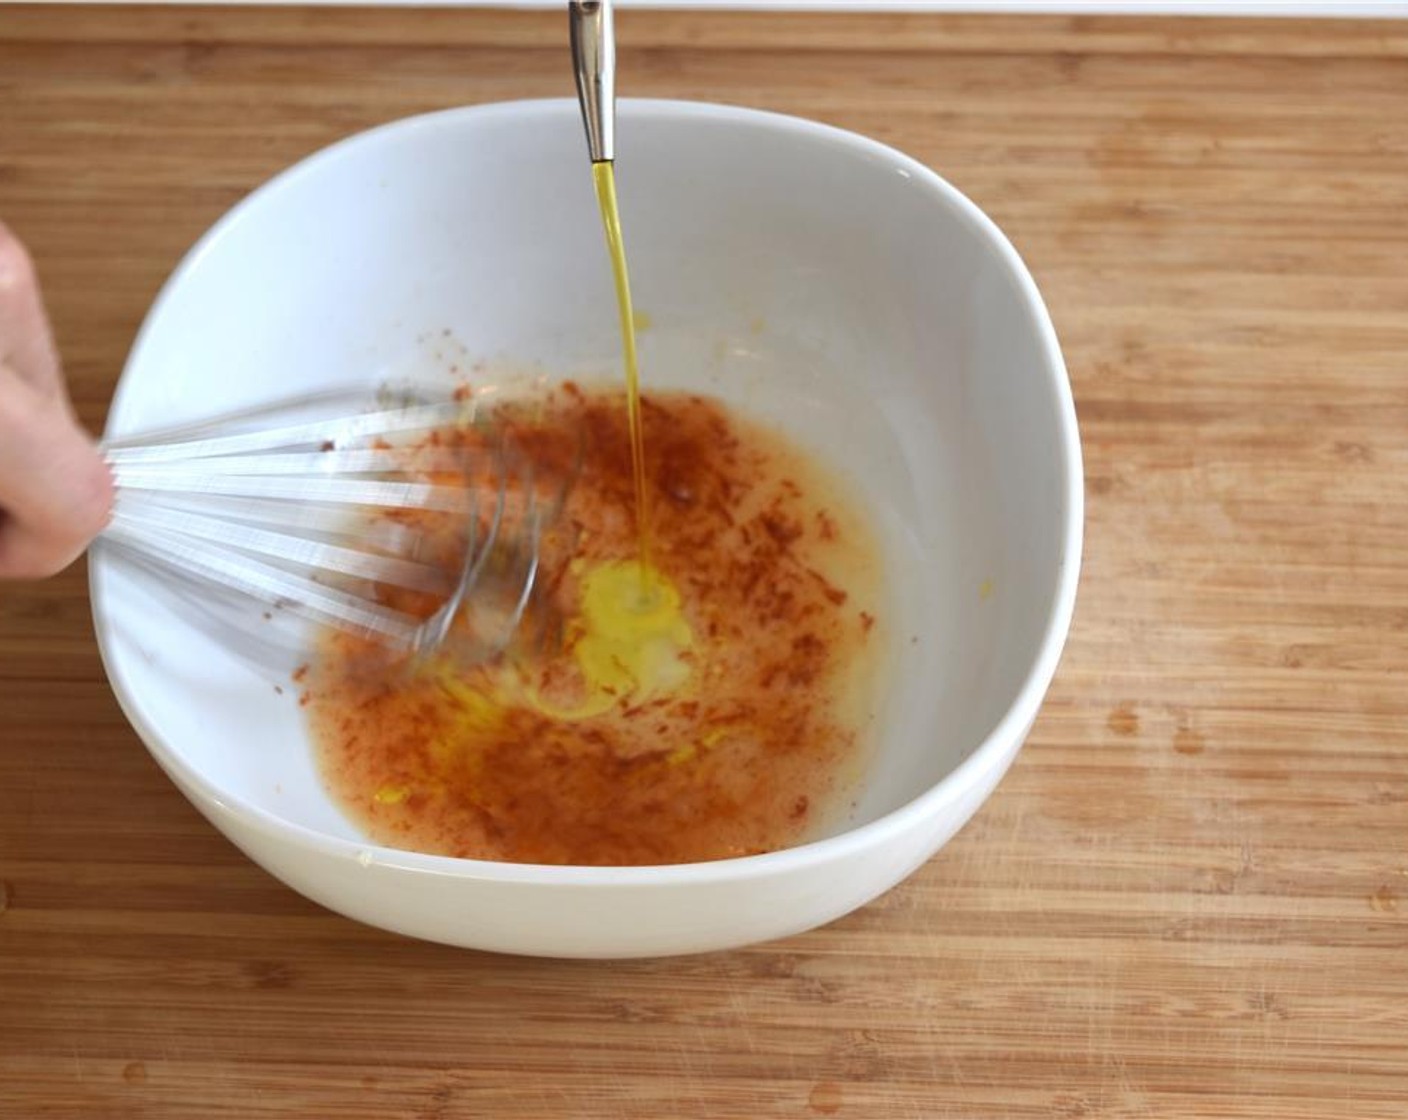 step 2 Add Chili Powder (1/2 tsp) and Honey (1 tsp), then stream with Olive Oil (1/2 cup) whisking constantly, until emulsified. Add Salt (to taste) and taste to check seasoning.